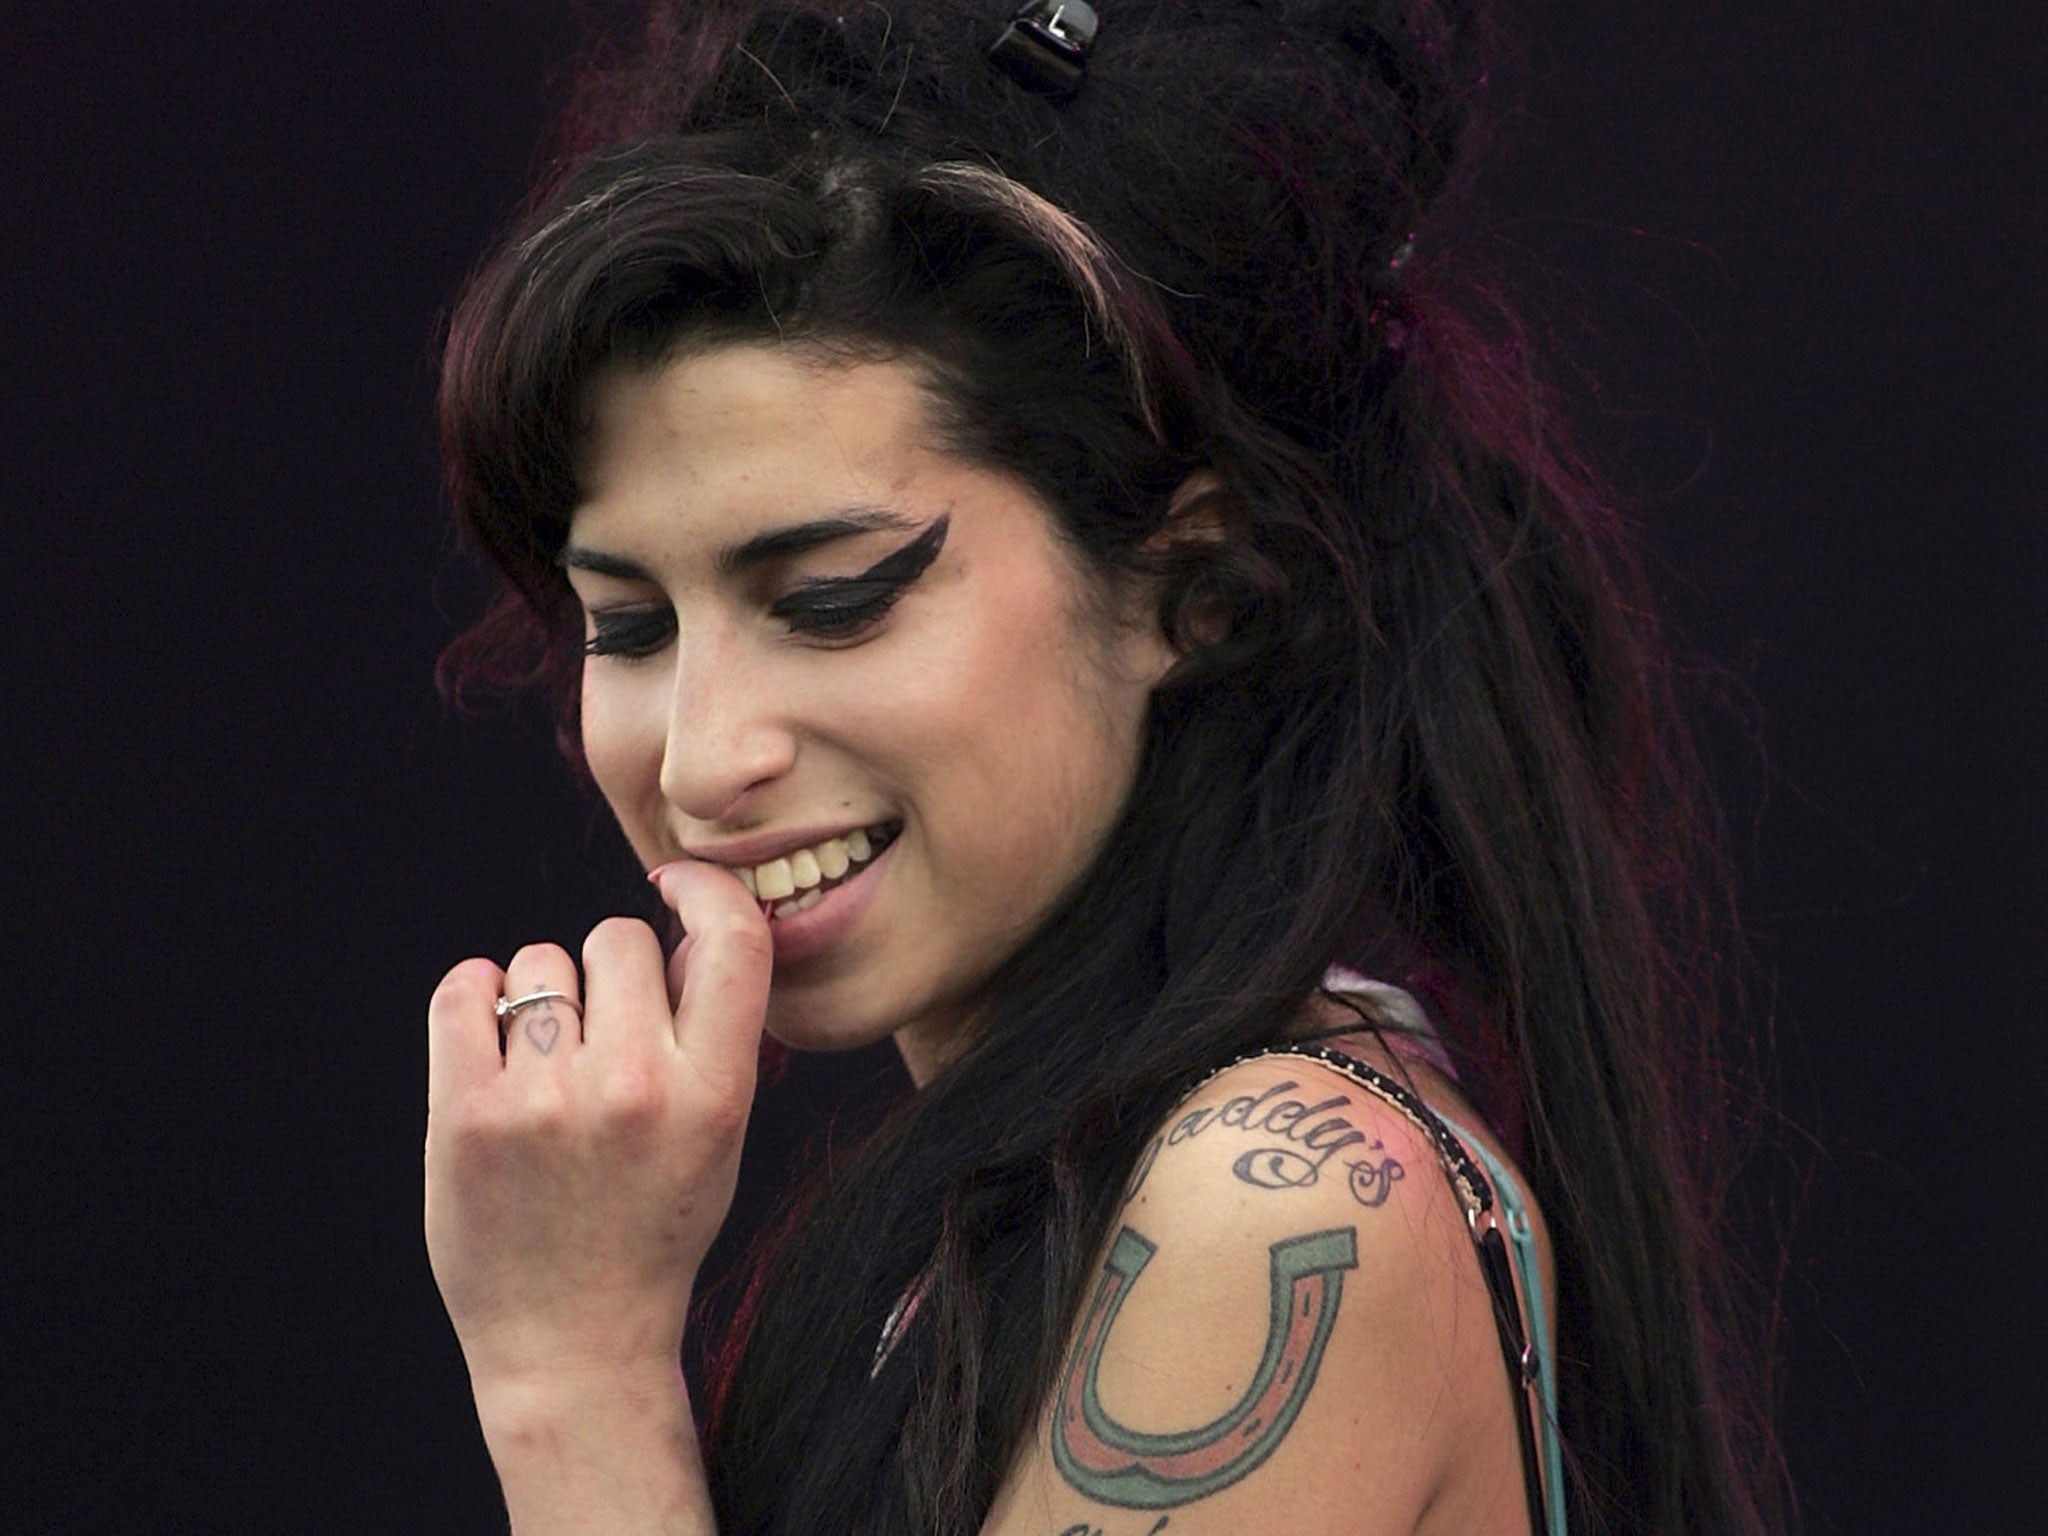 Amy Winehouse died aged 27